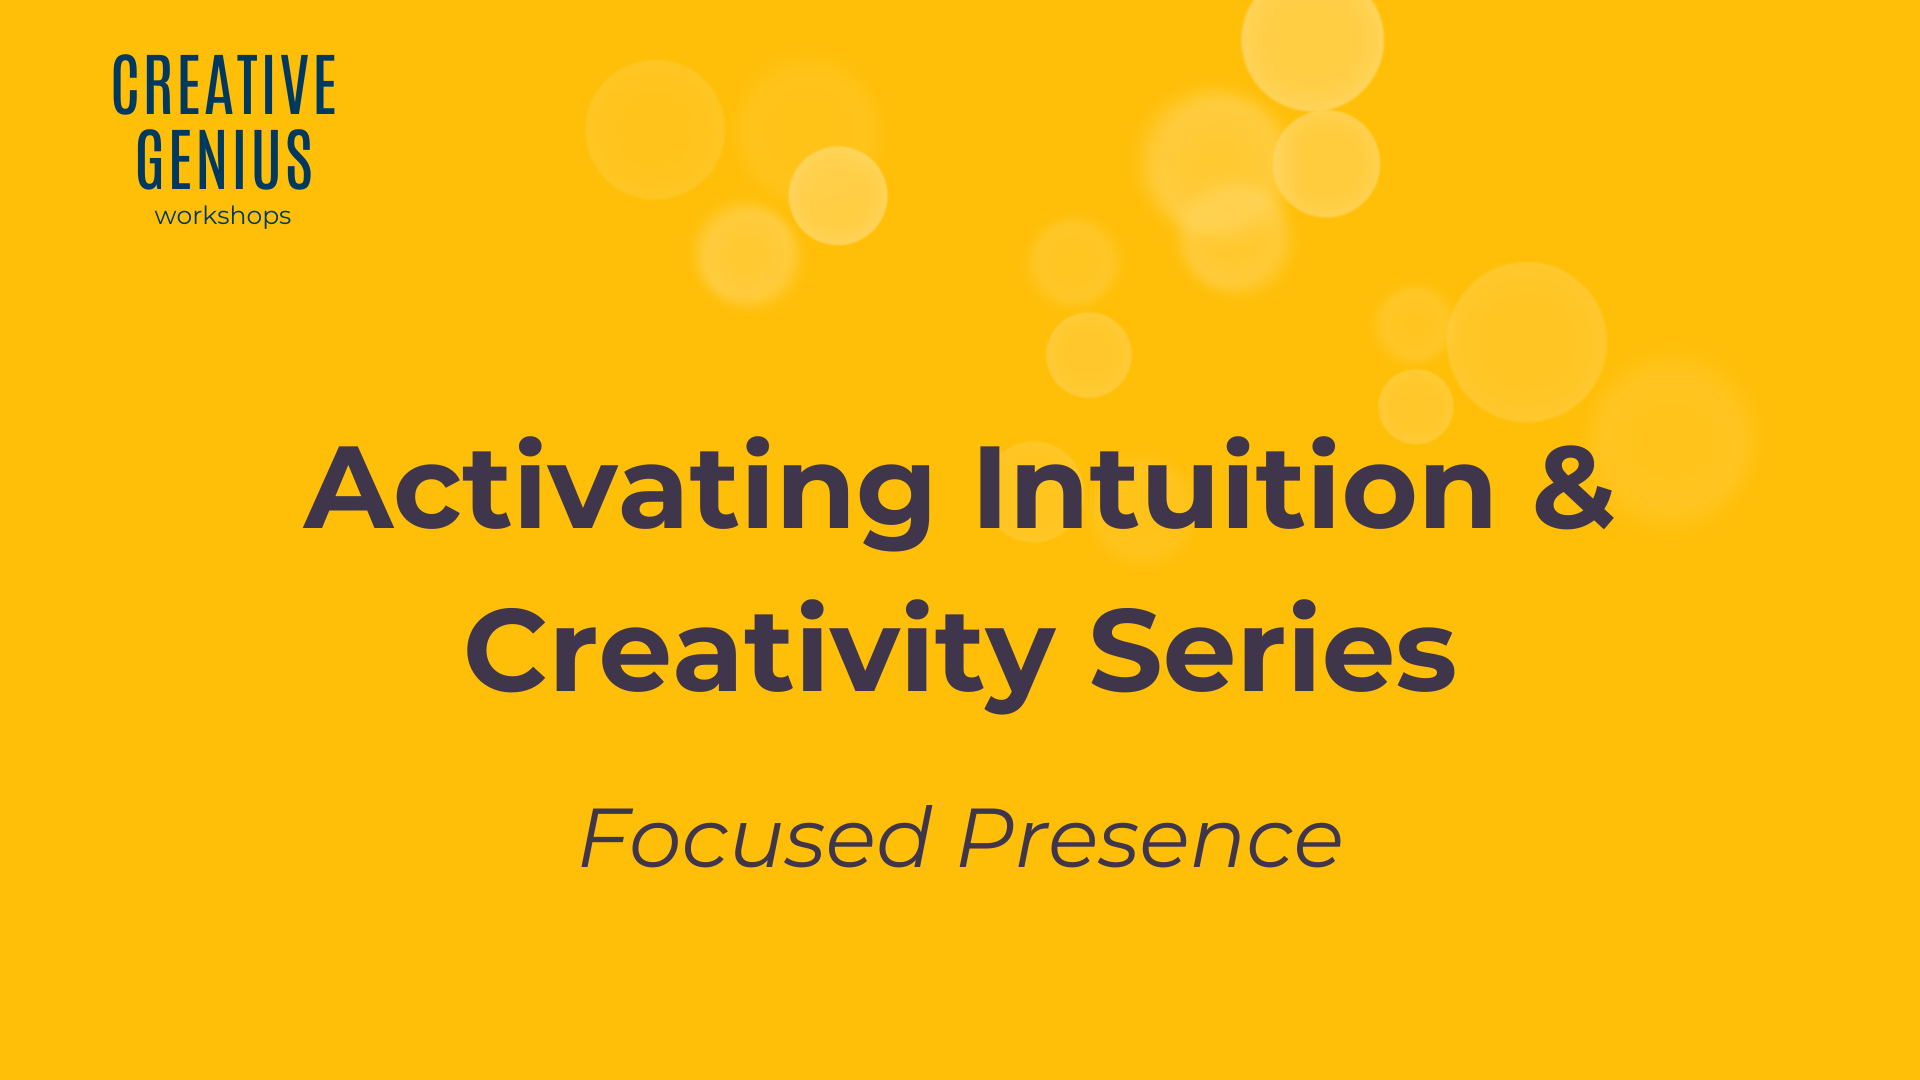 Activating Intuition & Creativity VIRTUAL WORKSHOP: Focused Presence